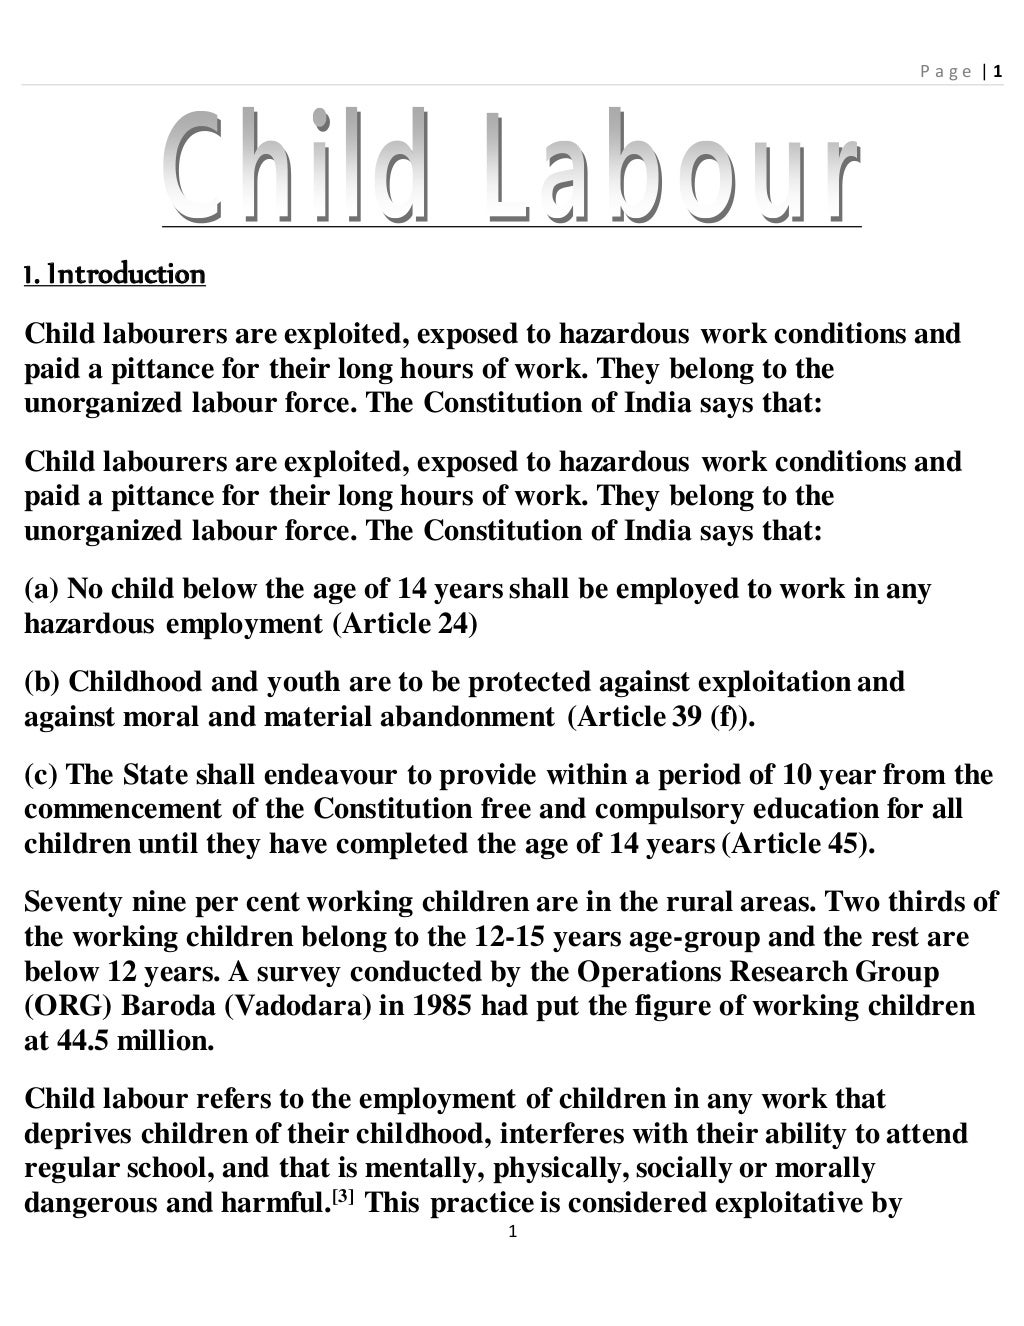 thesis of child labor